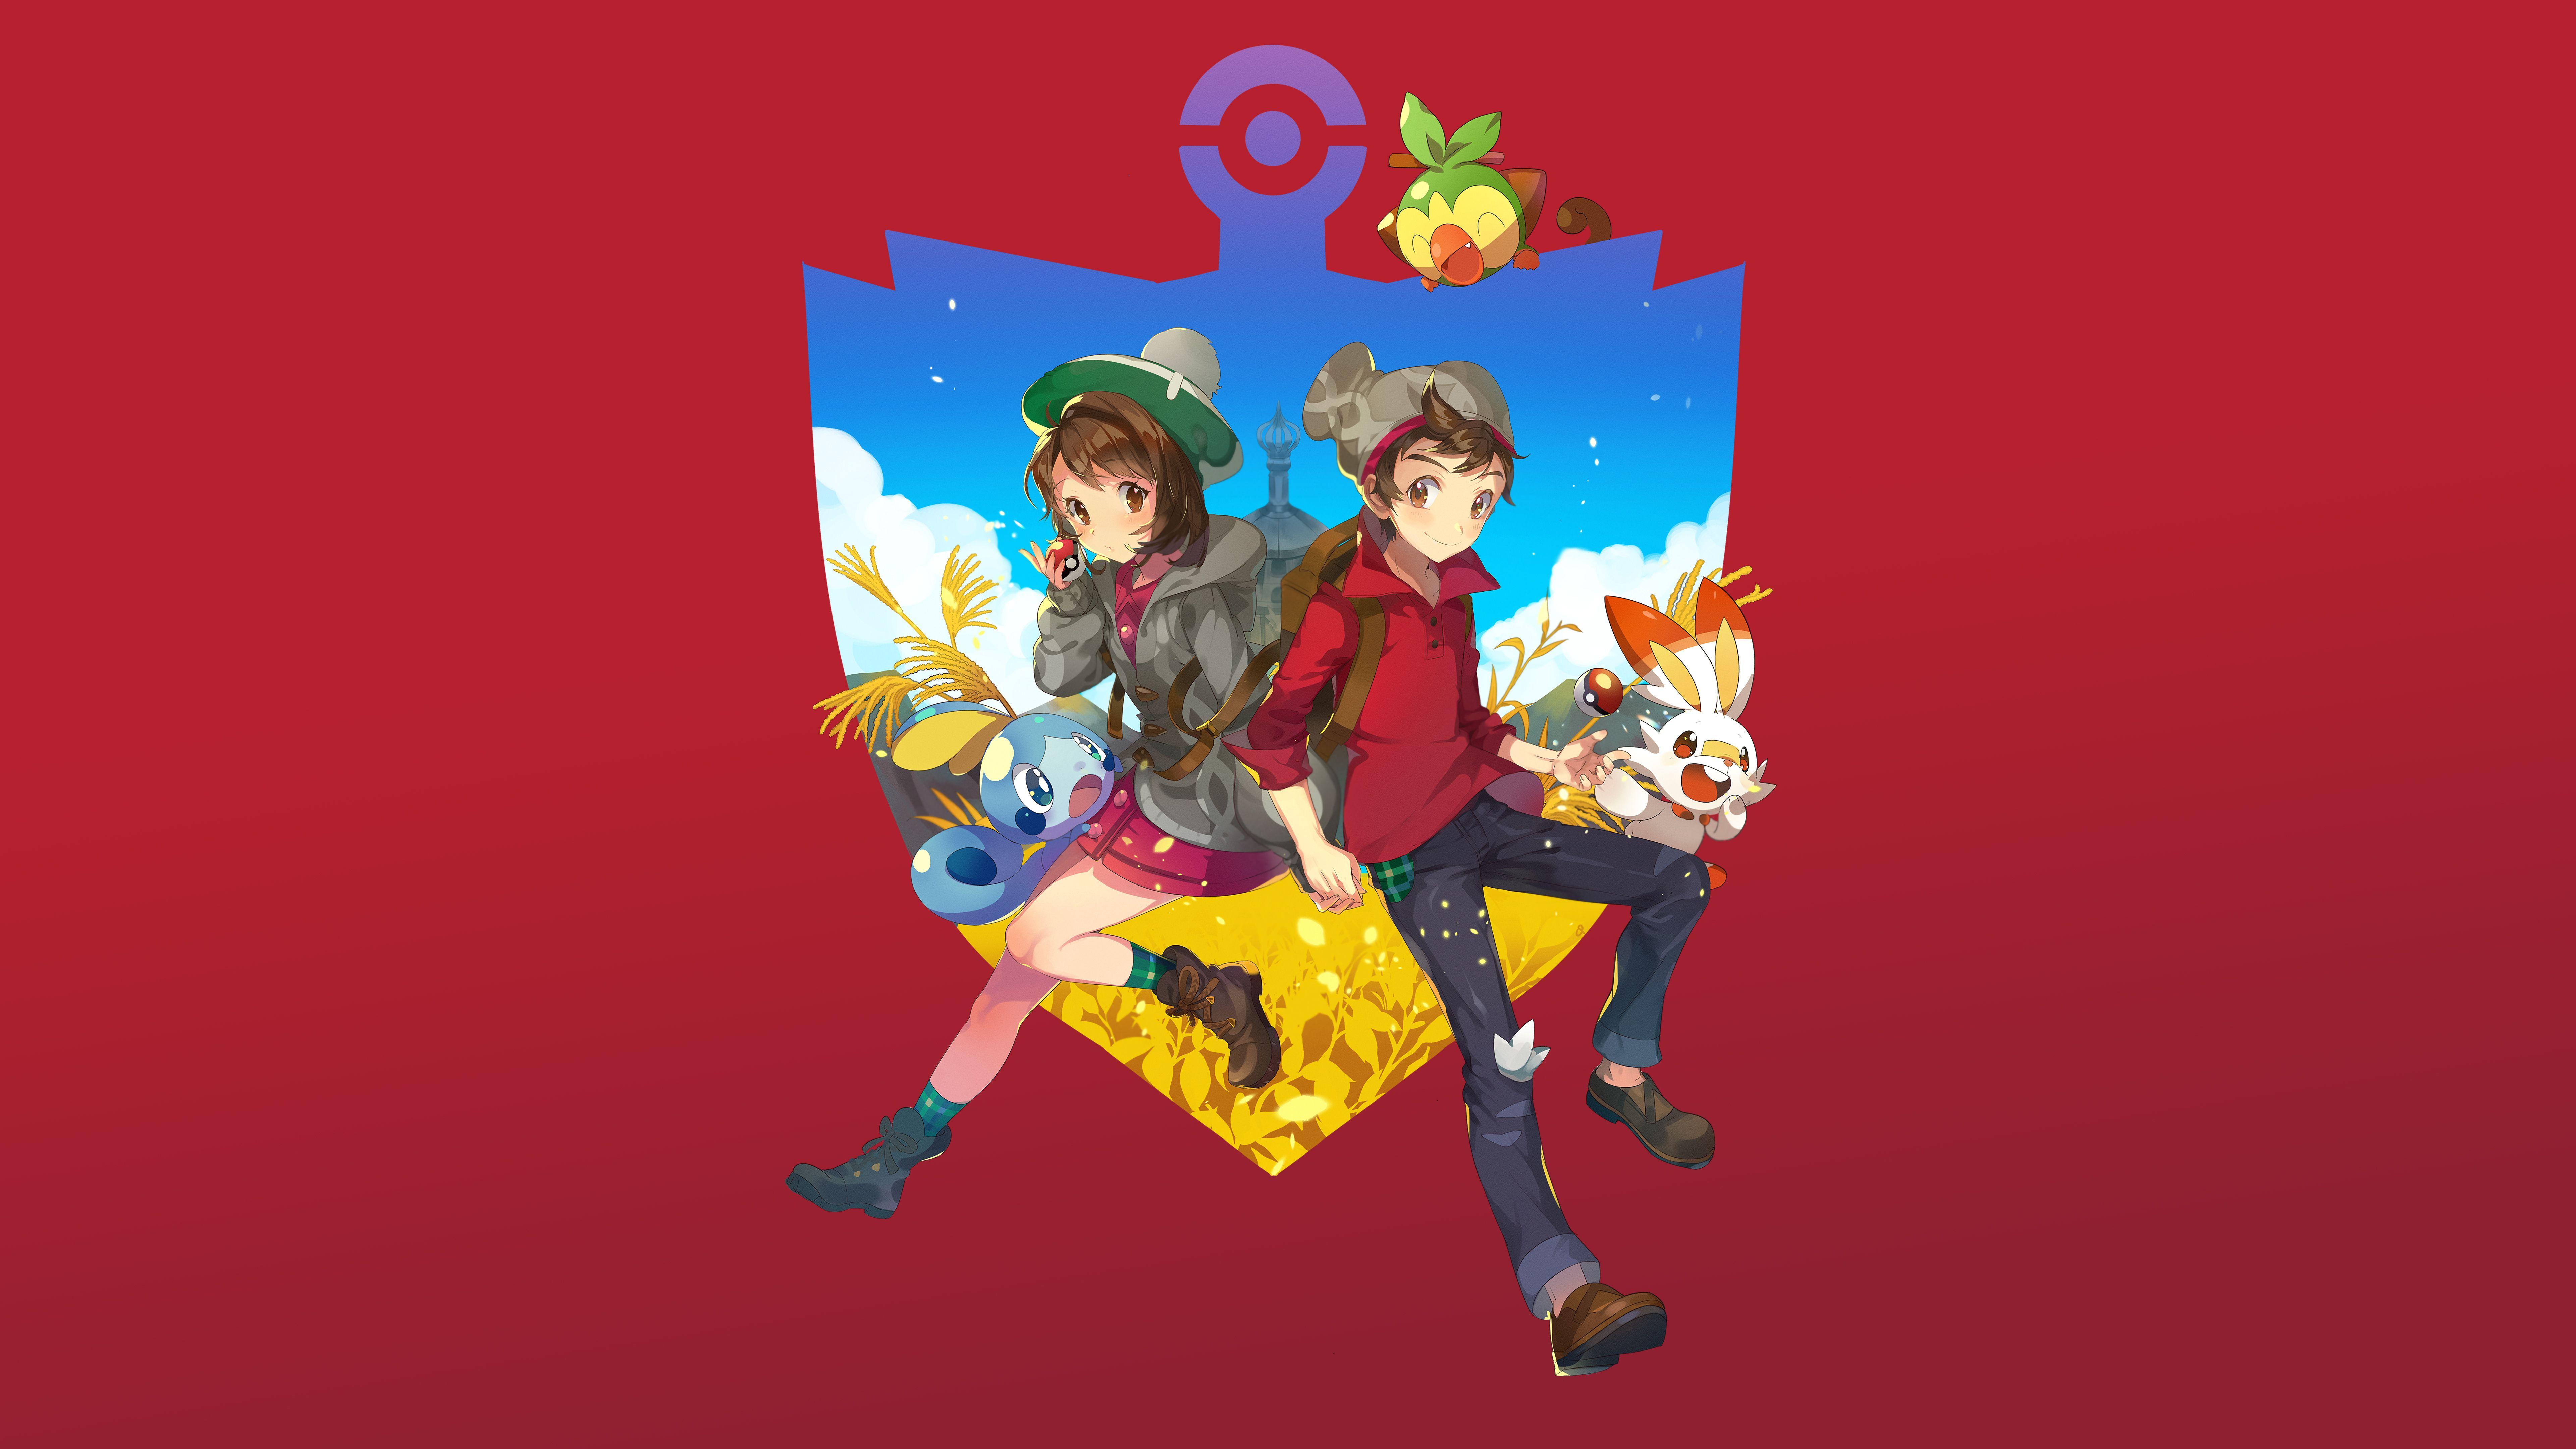 Pokemon Sword And Shield Wallpapers Top Free Pokemon Sword And Shield Backgrounds Wallpaperaccess